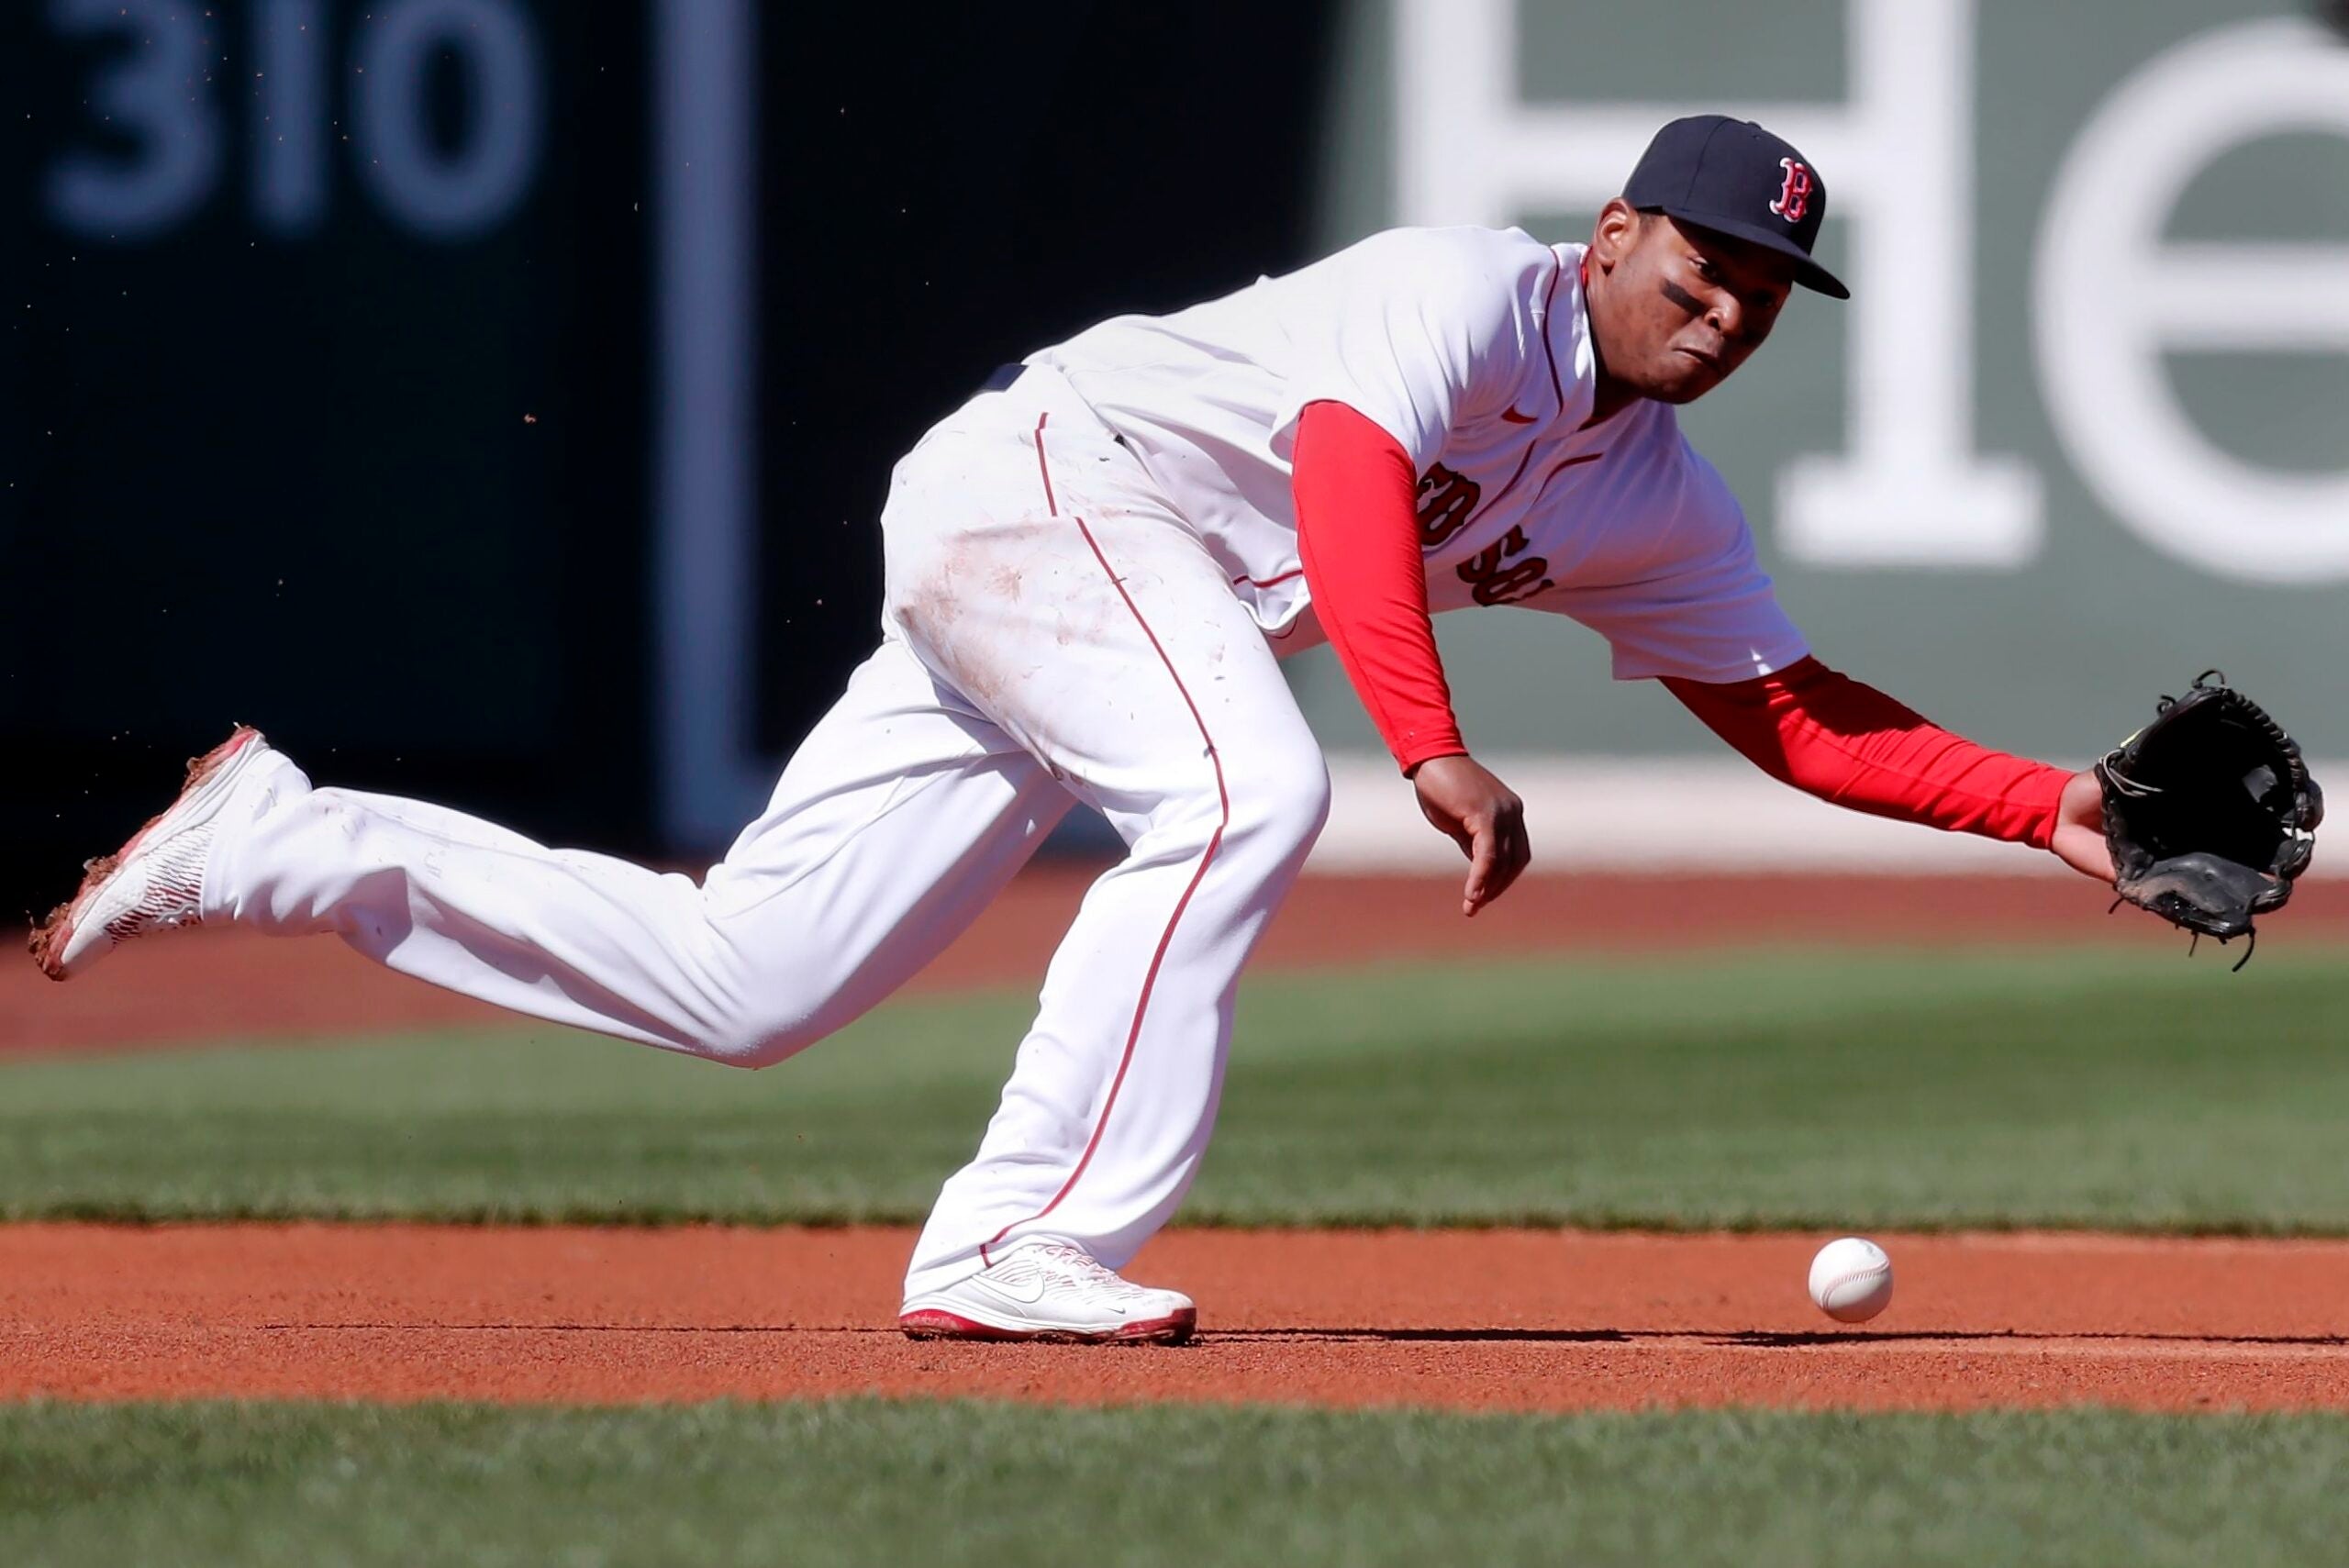 5 keys for the Red Sox to find success this season